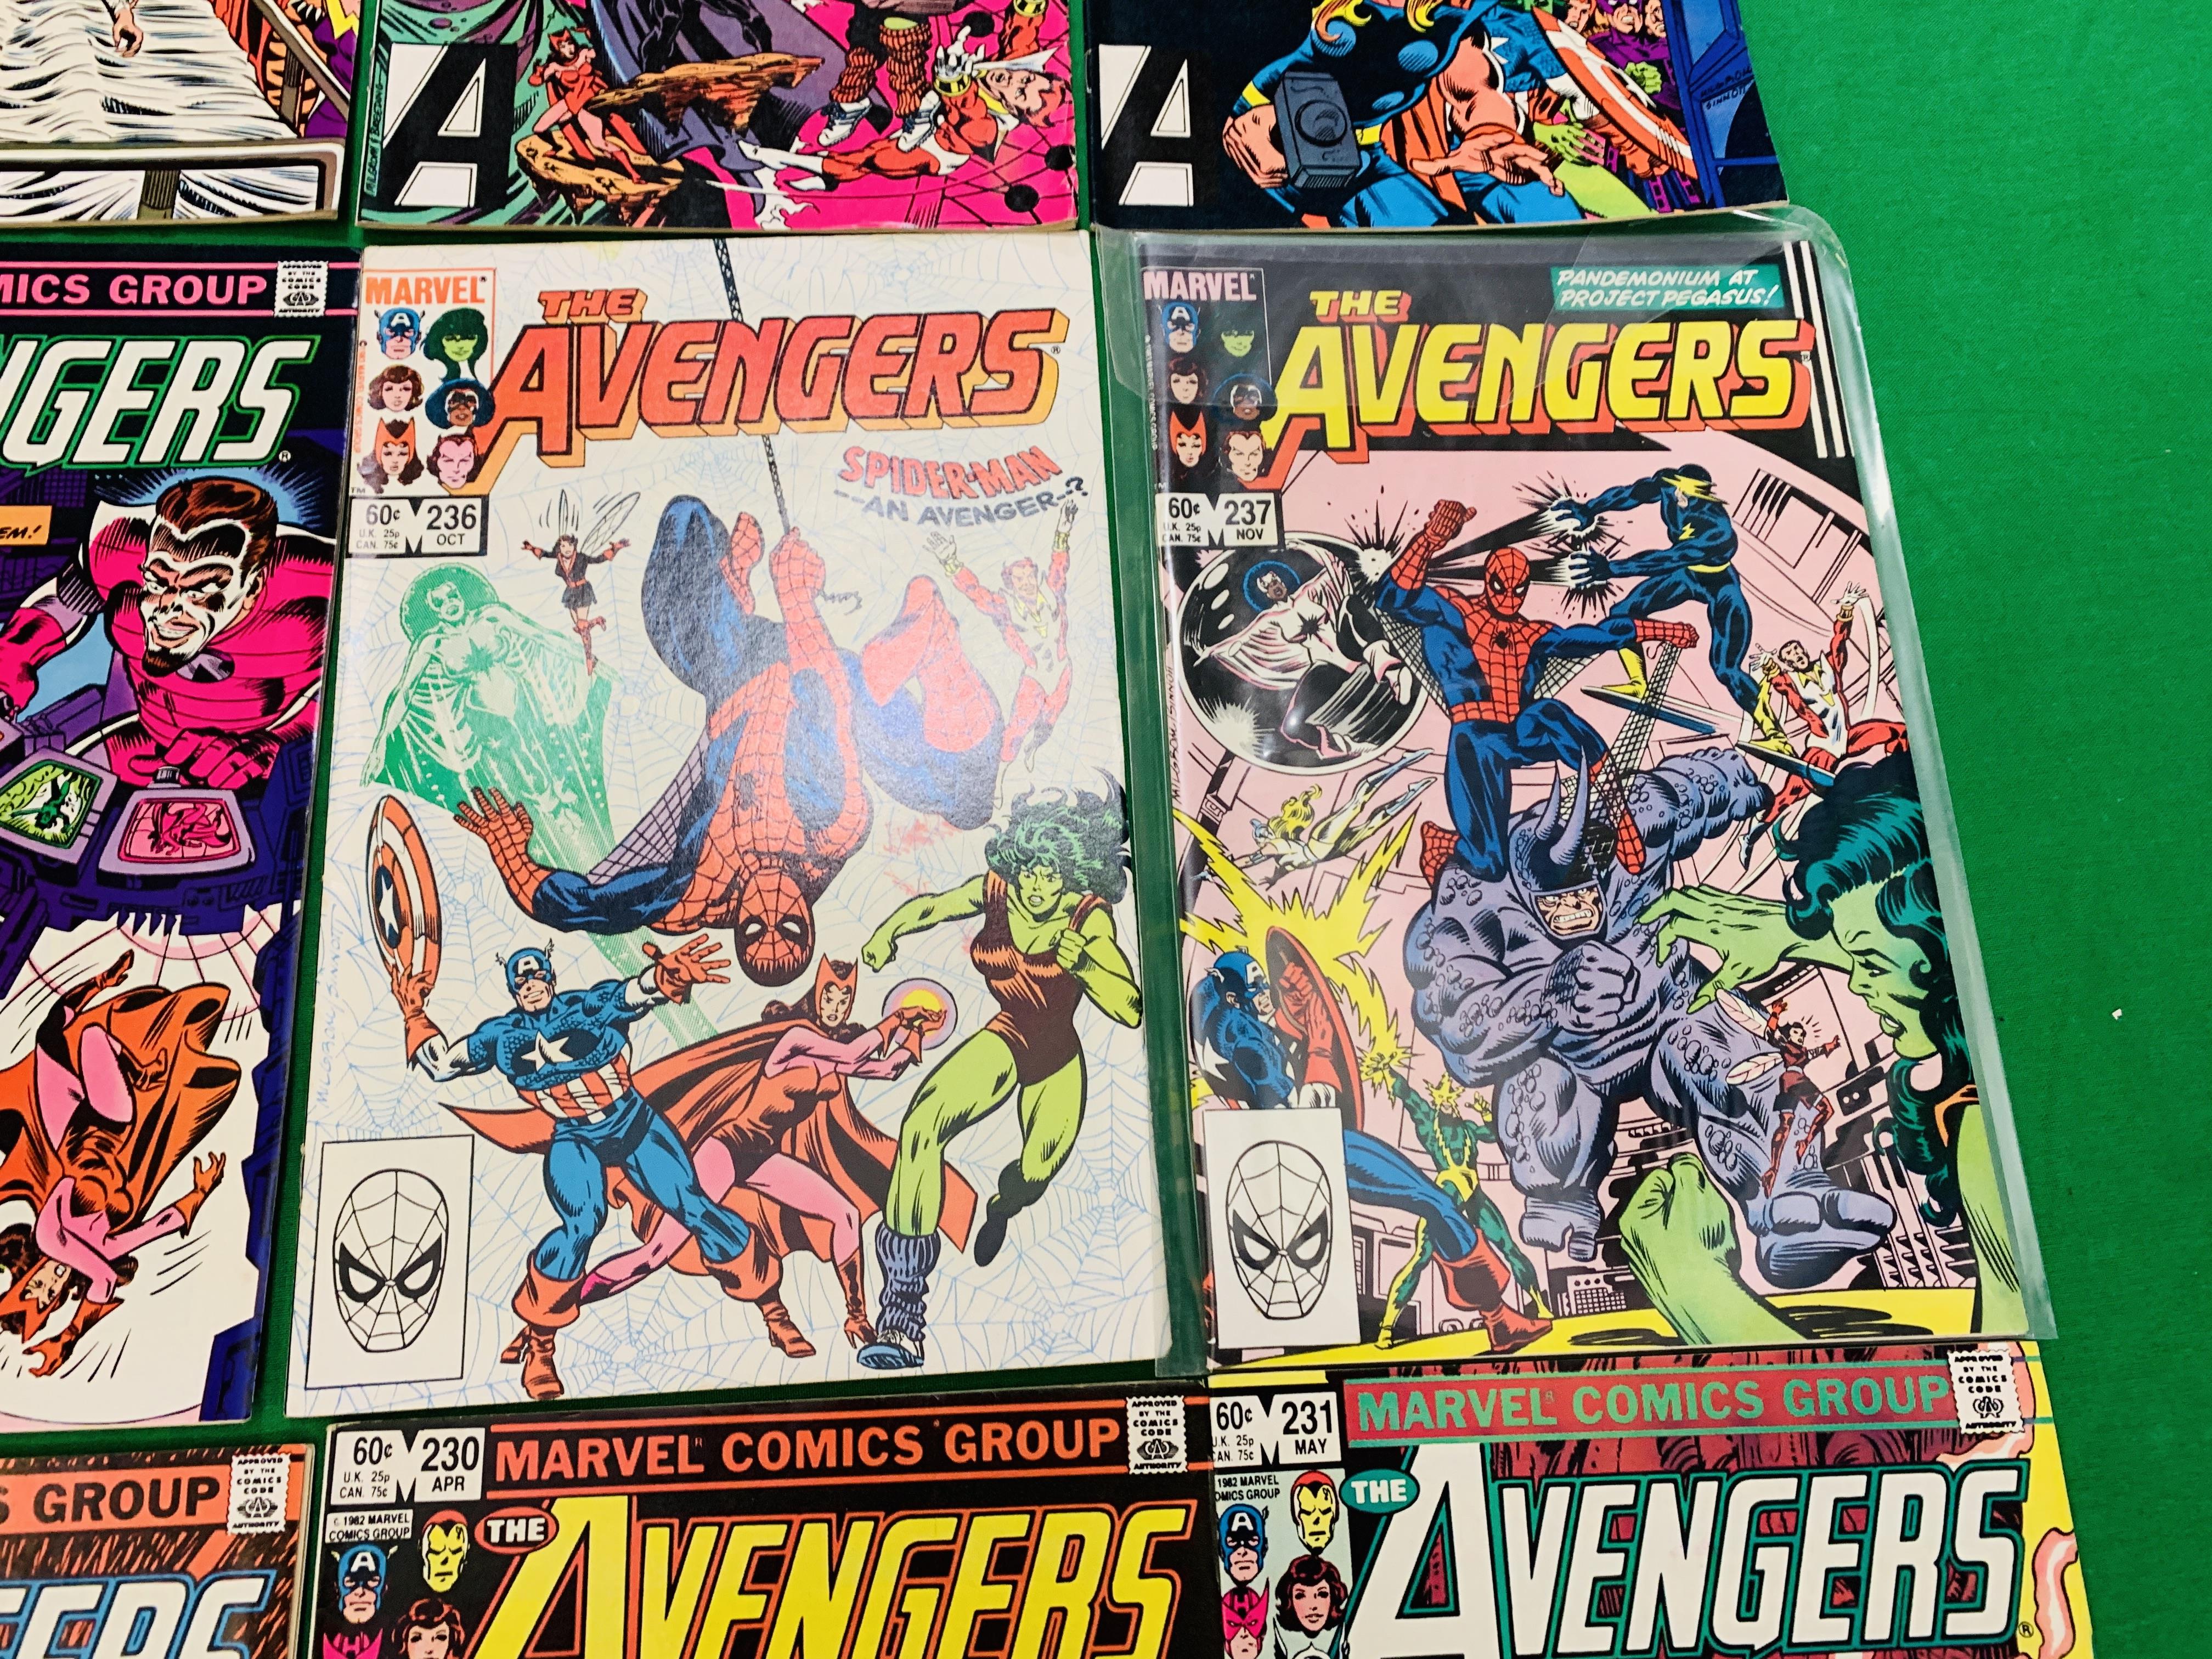 MARVEL COMICS THE AVENGERS NO. 101 - 299, MISSING ISSUES 103 AND 110. - Image 95 of 130